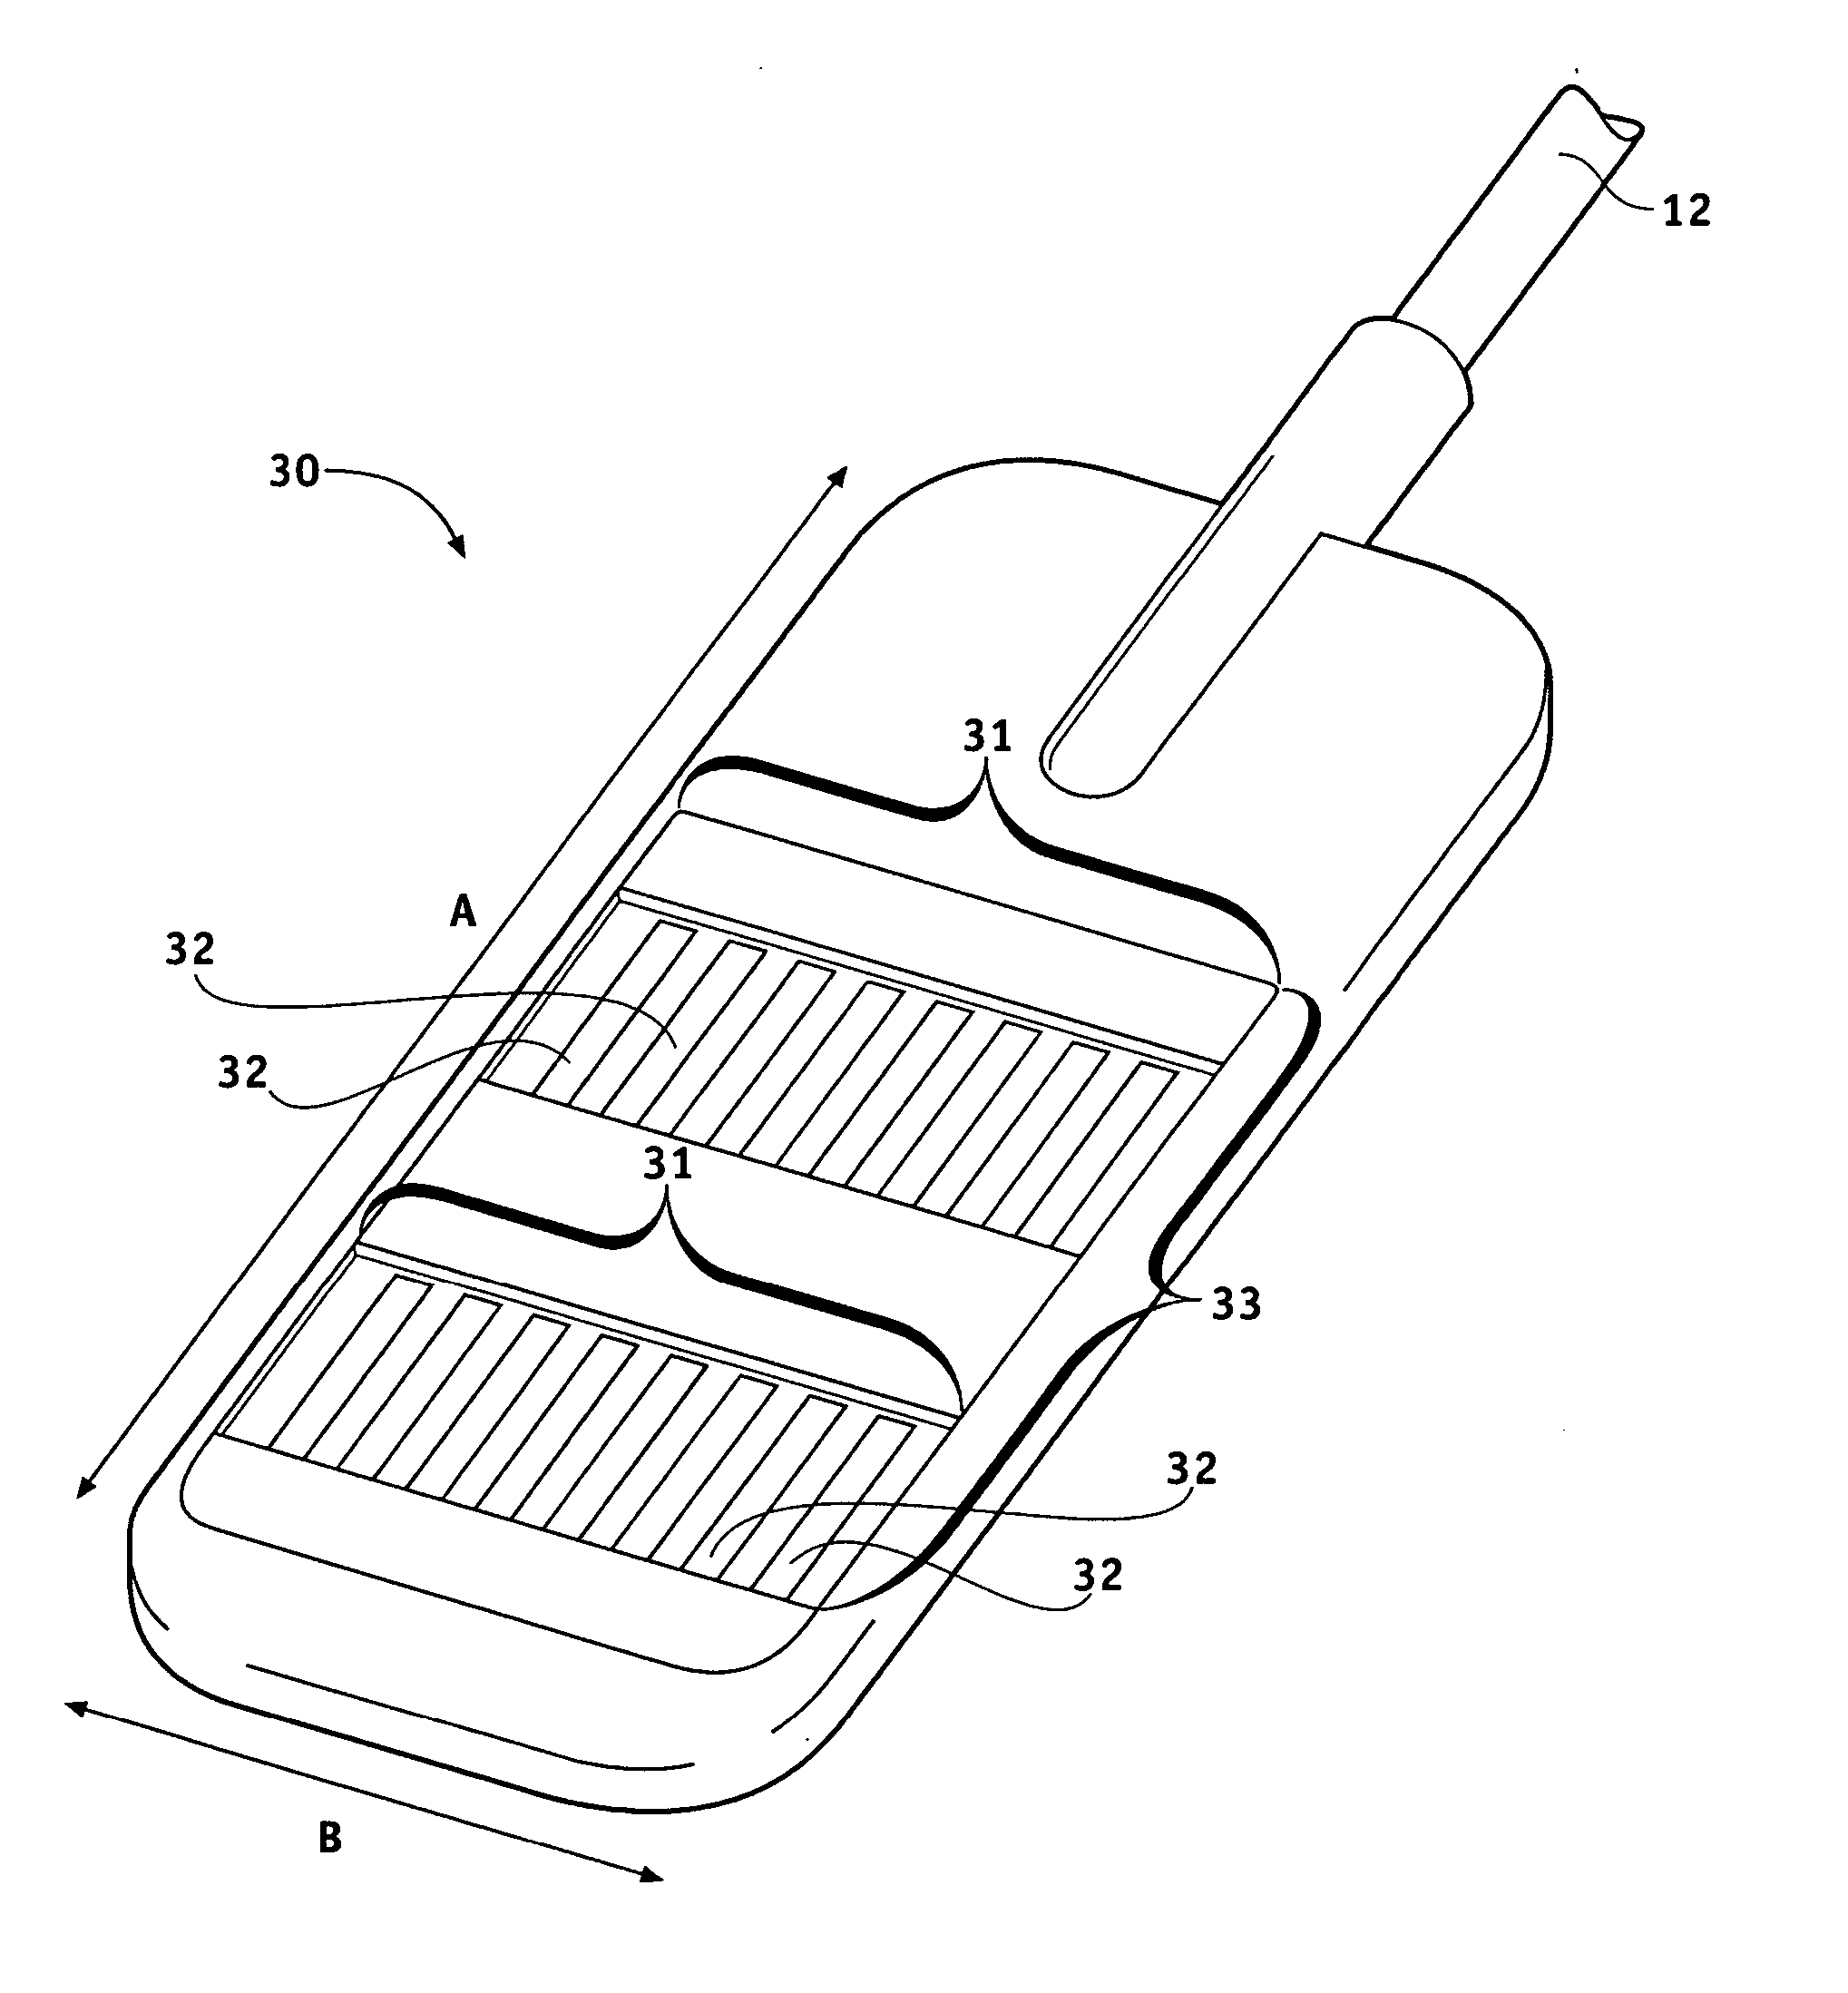 Field steerable electrical stimulation paddle, lead system, and medical device incorporating the same